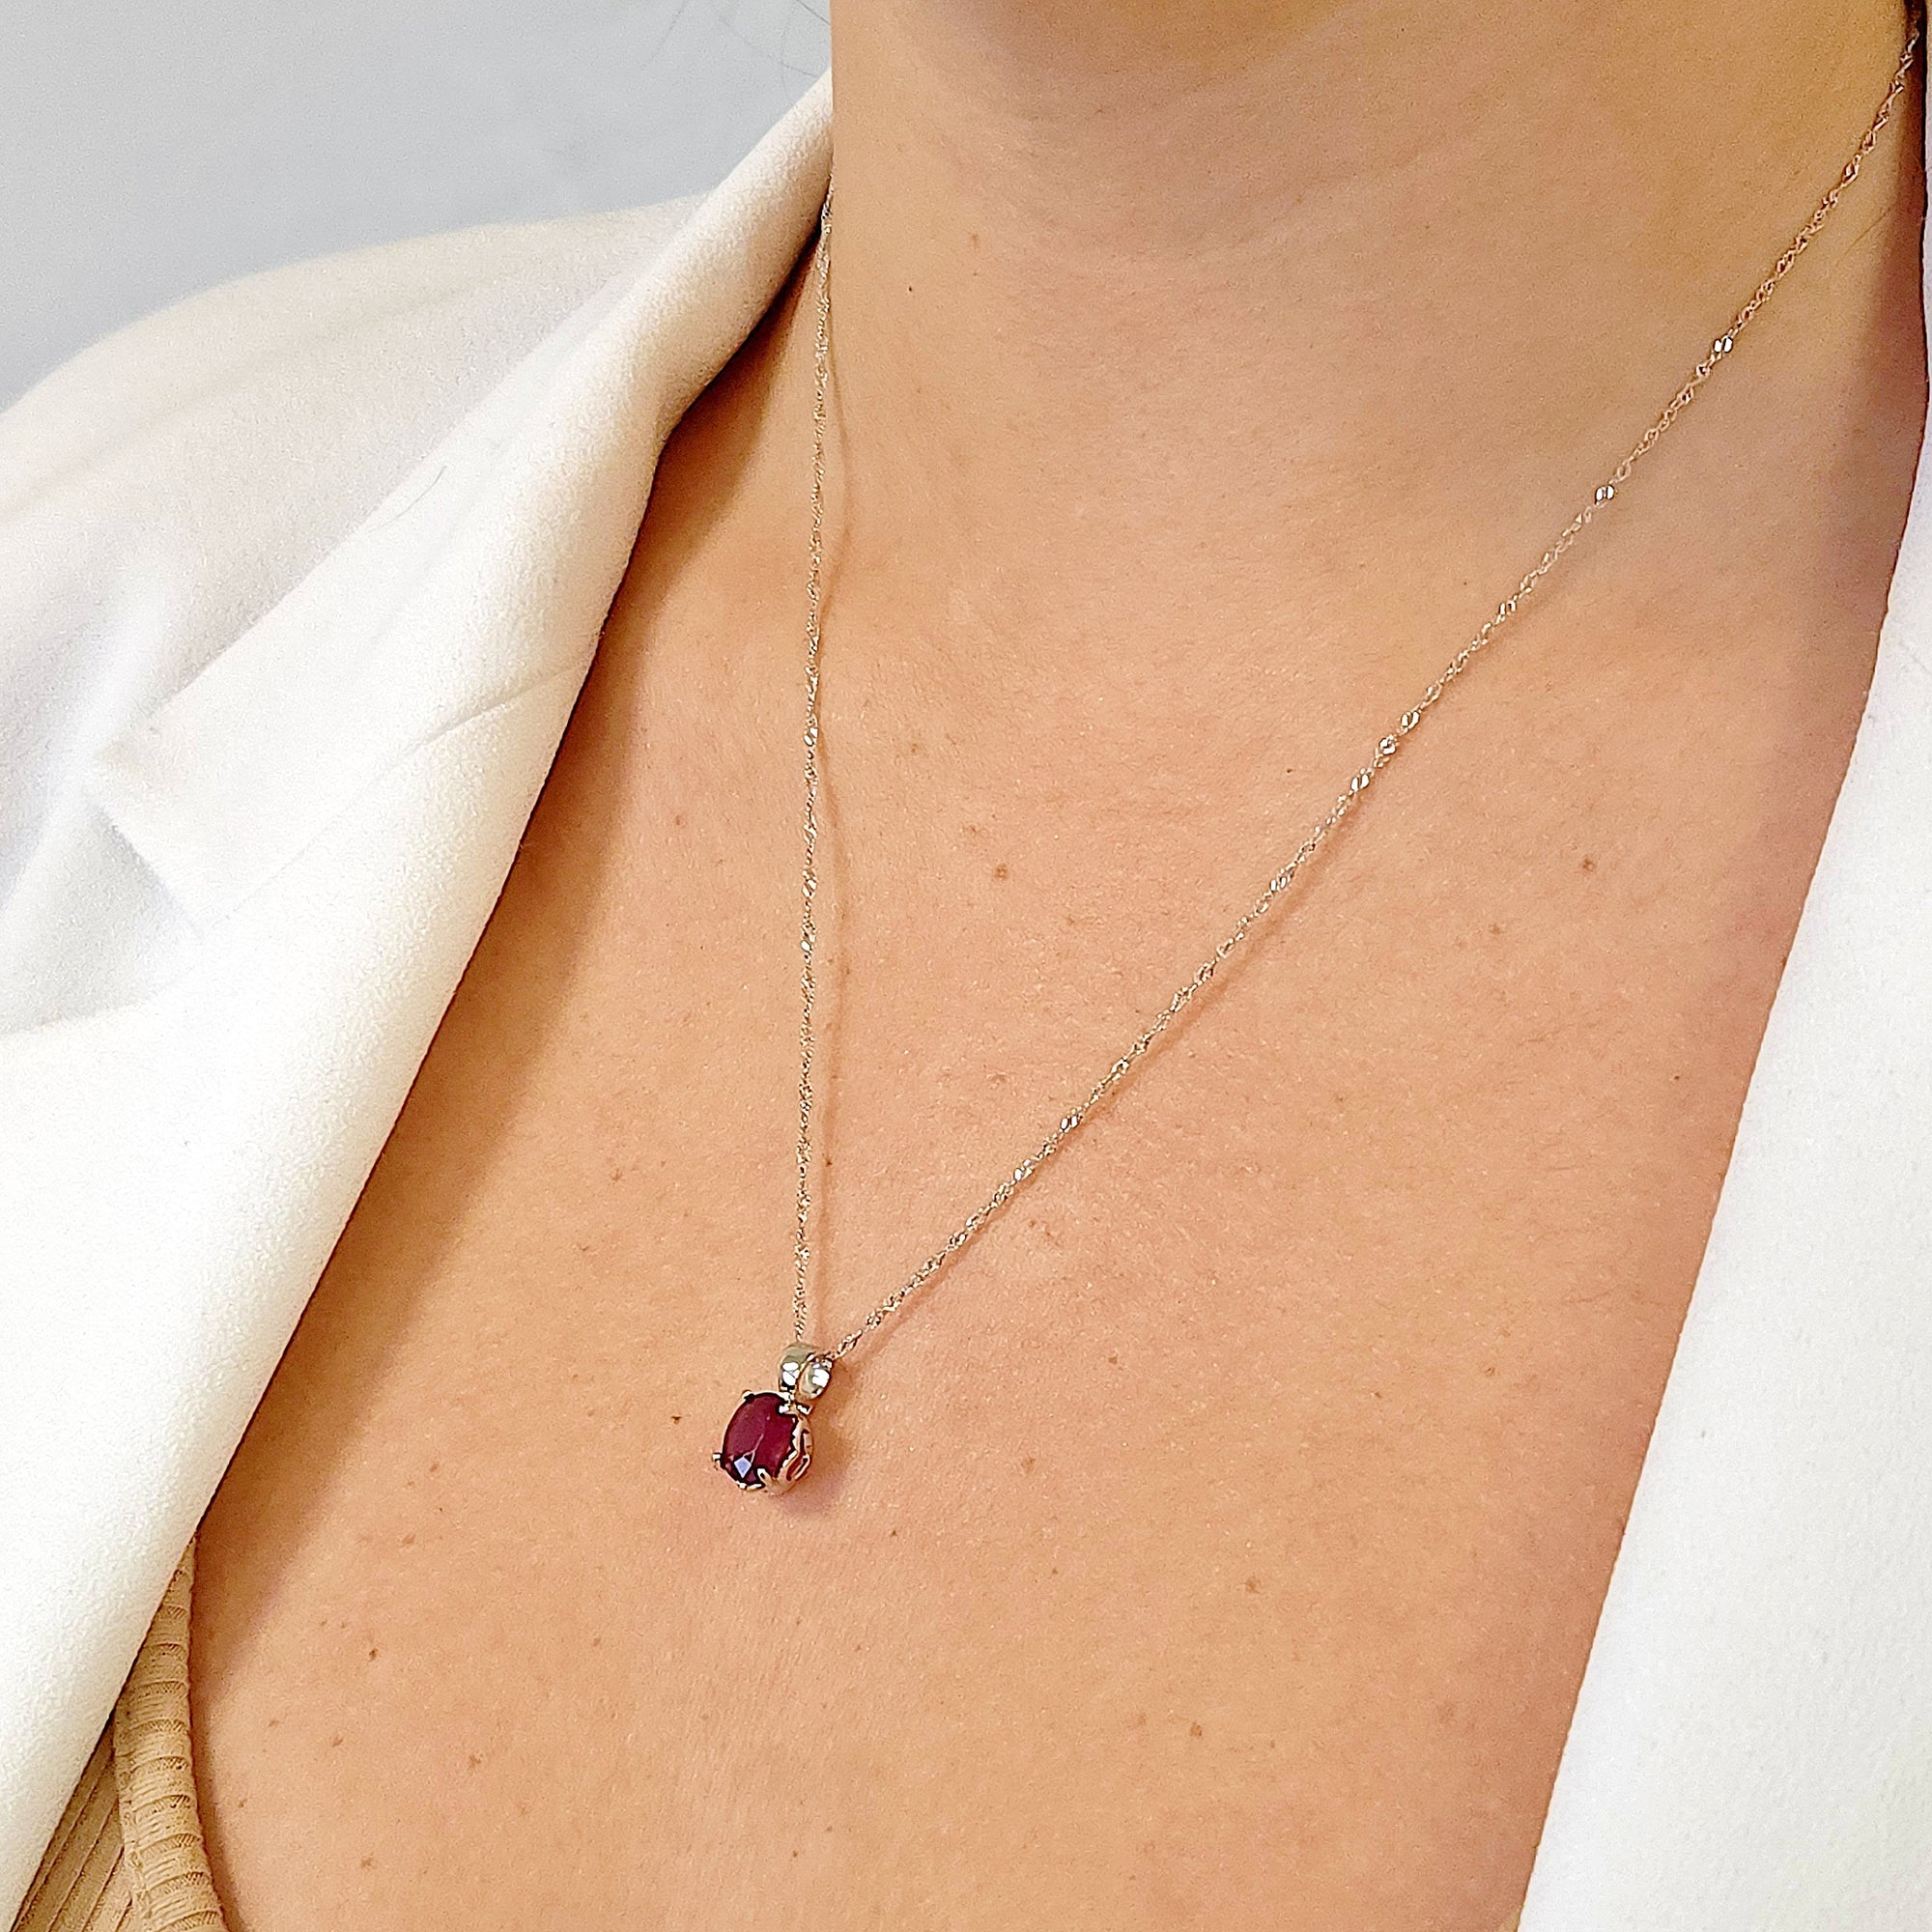 Natural Ruby Heart Necklace - Uniquelan Jewelry